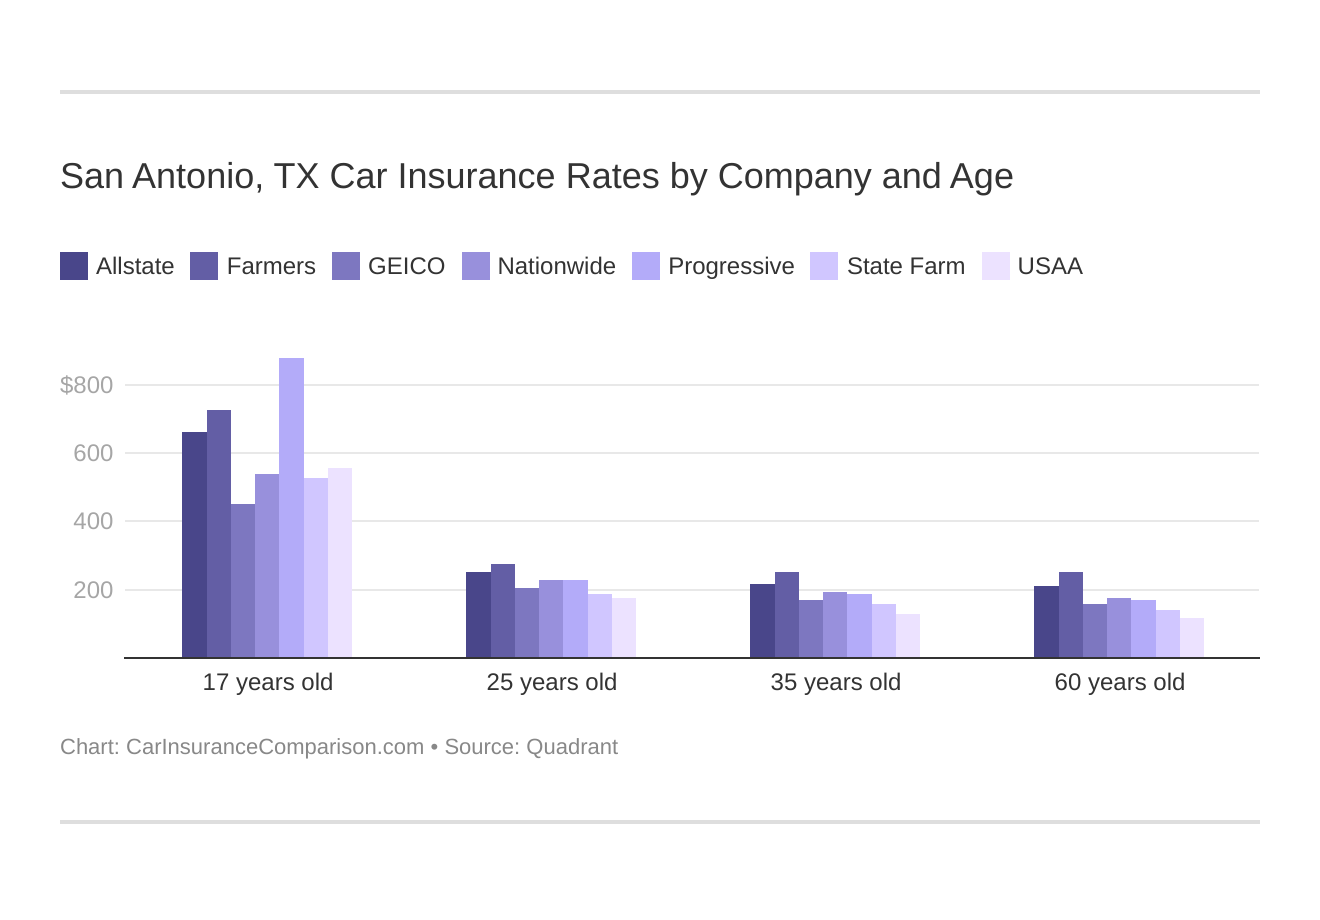 San Antonio, TX Car Insurance Rates by Company and Age